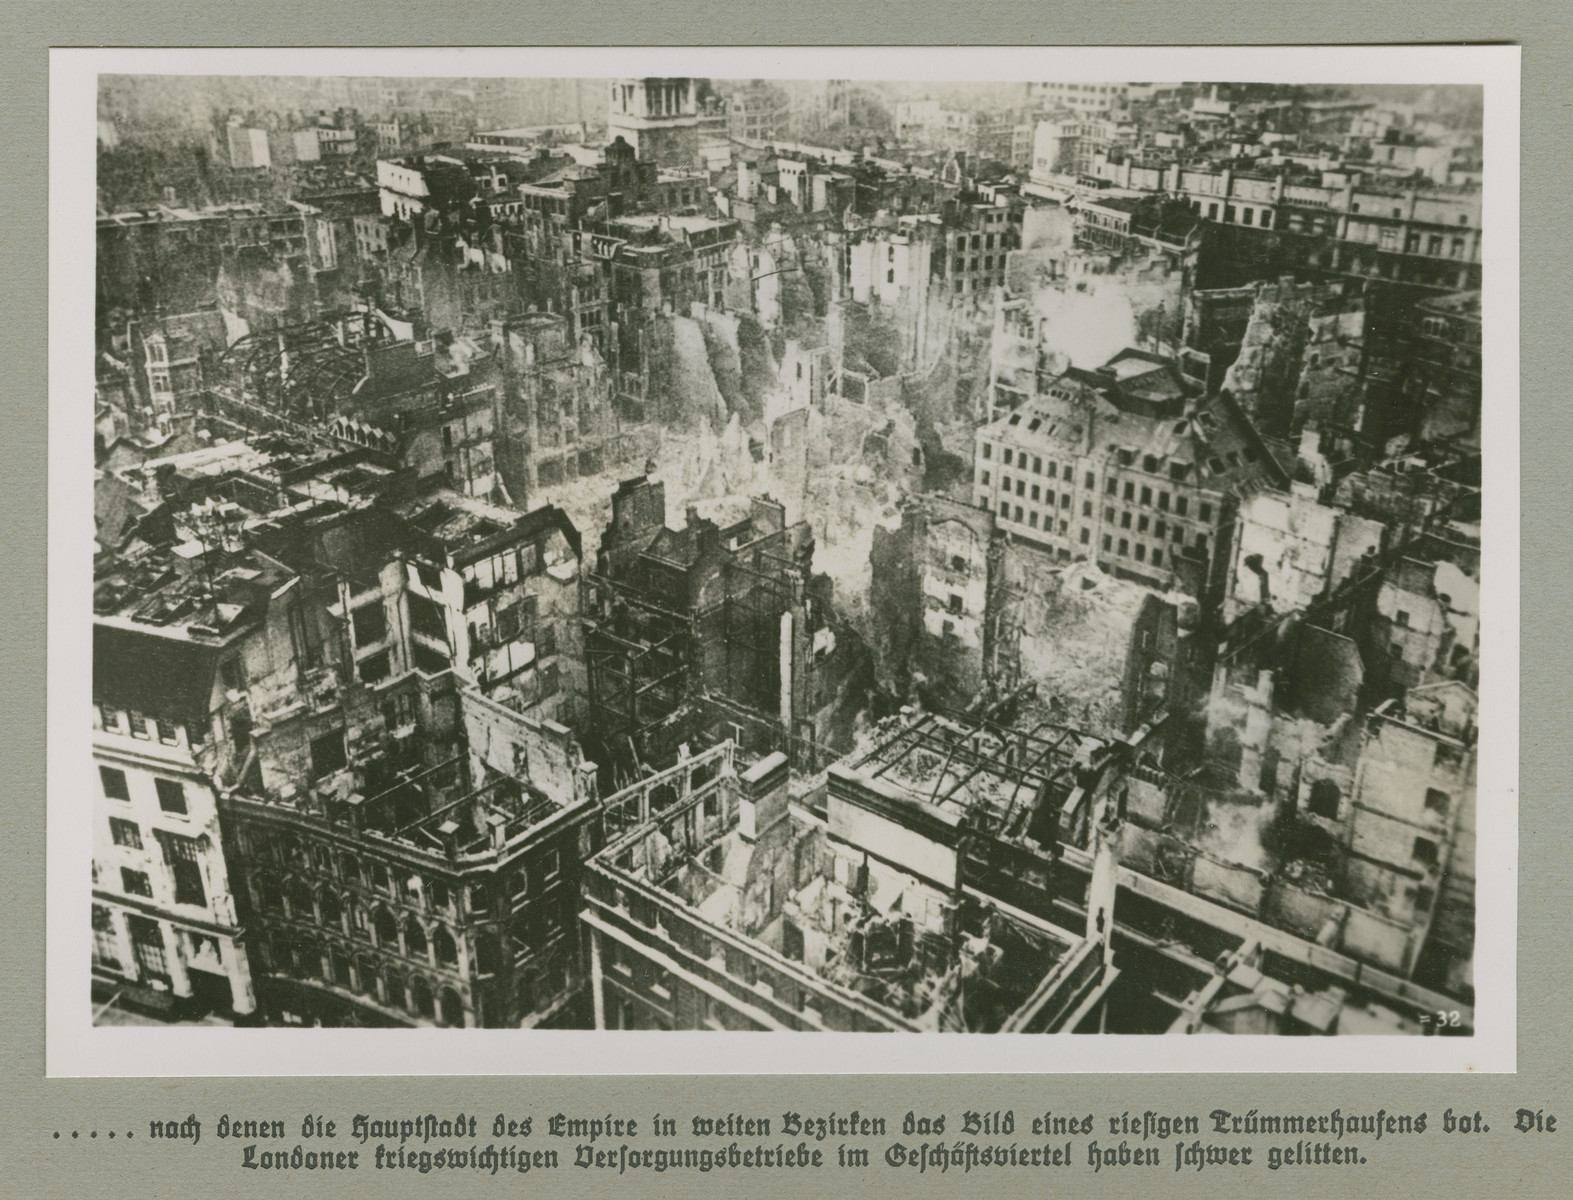 Aerial view of a bombed city quarter in London.

Original caption reads: ...after the capital of the empire was made into a giant pile of rubble in those districts pictured. London's strategic utilities companies in the commercial district suffered heavily.